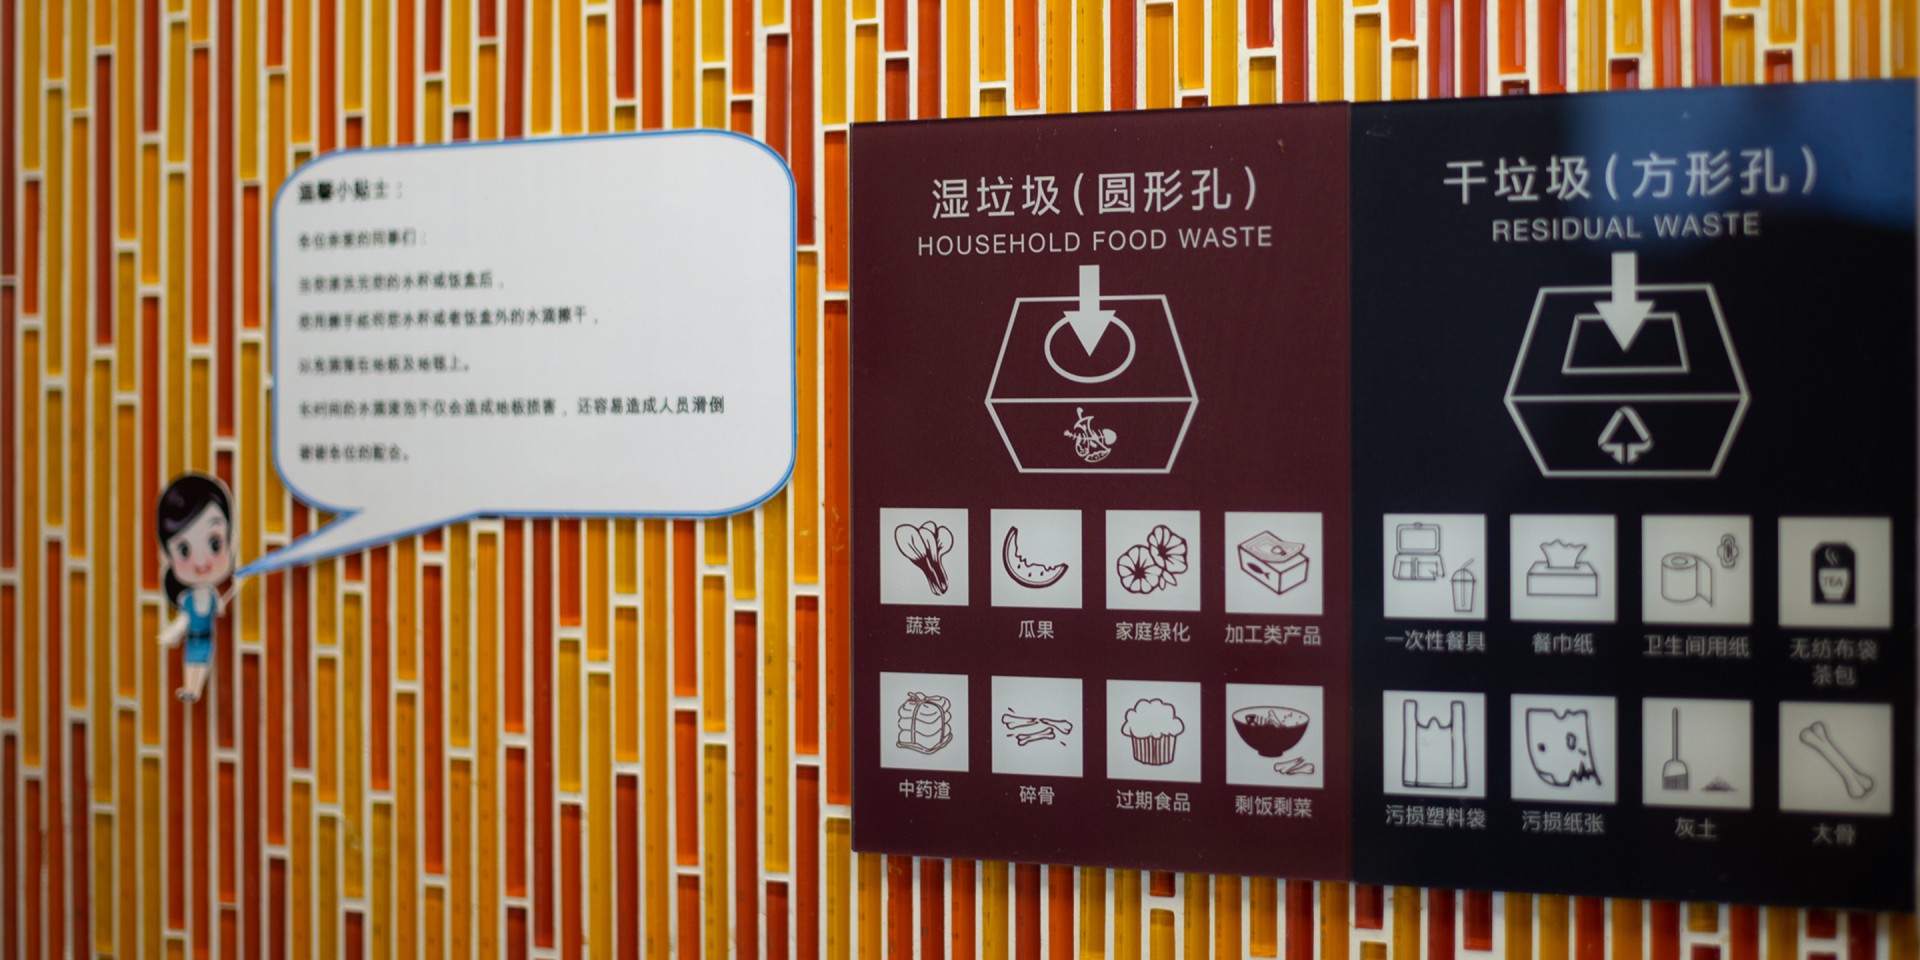 A sign showing how to sort waste at WACKER Shanghai